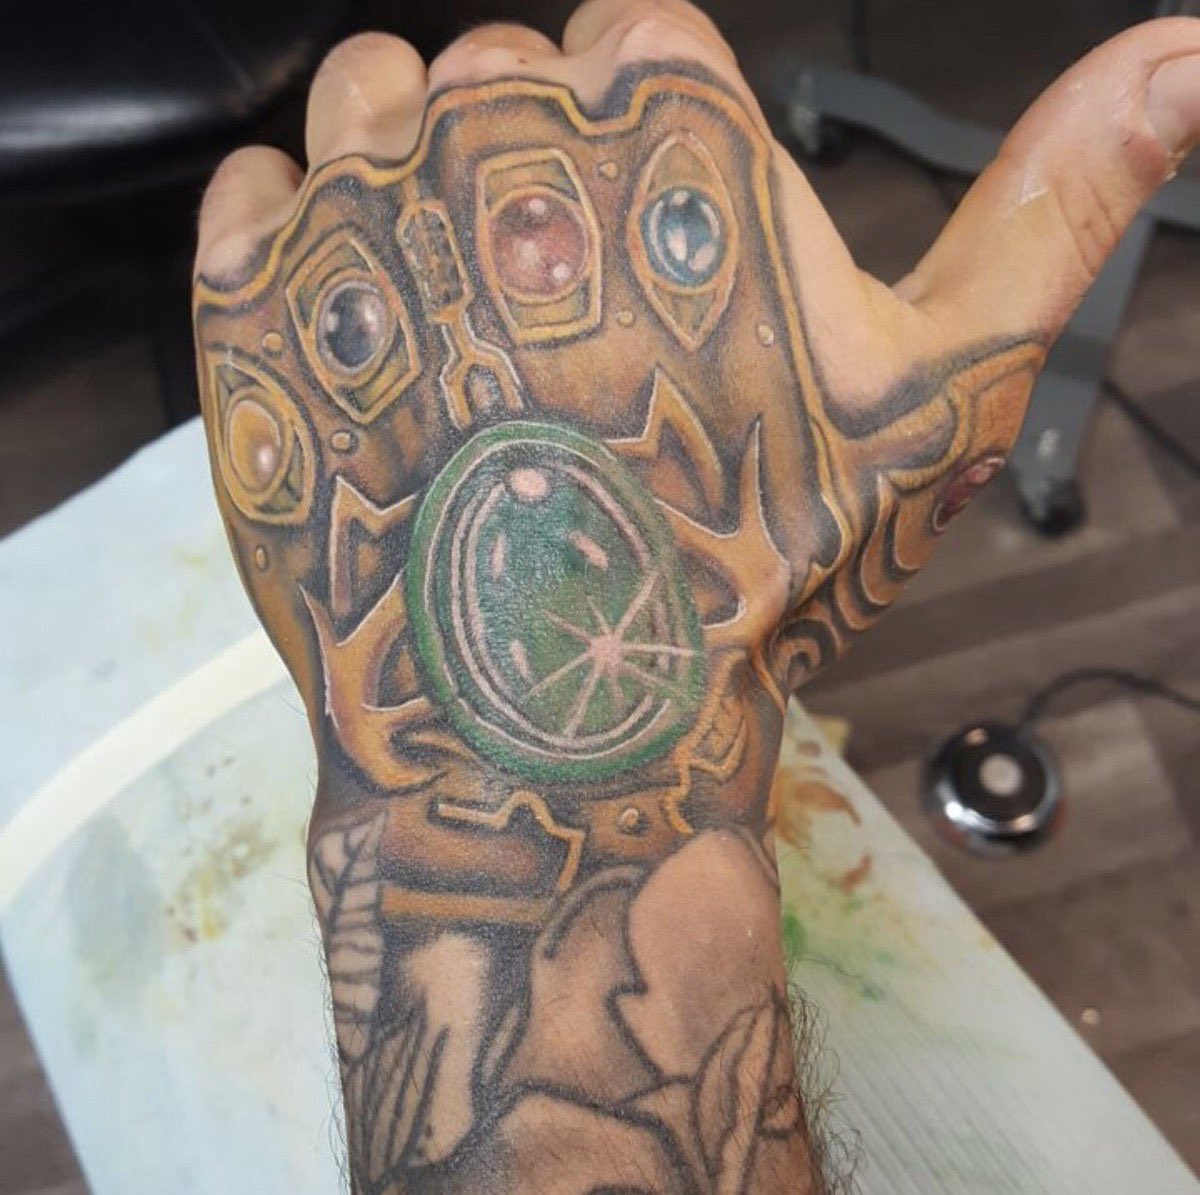 Infinity Gauntlet tattoo flash art I made in anticipation for Endgame   Marvel tattoos Marvel drawings Avengers tattoo